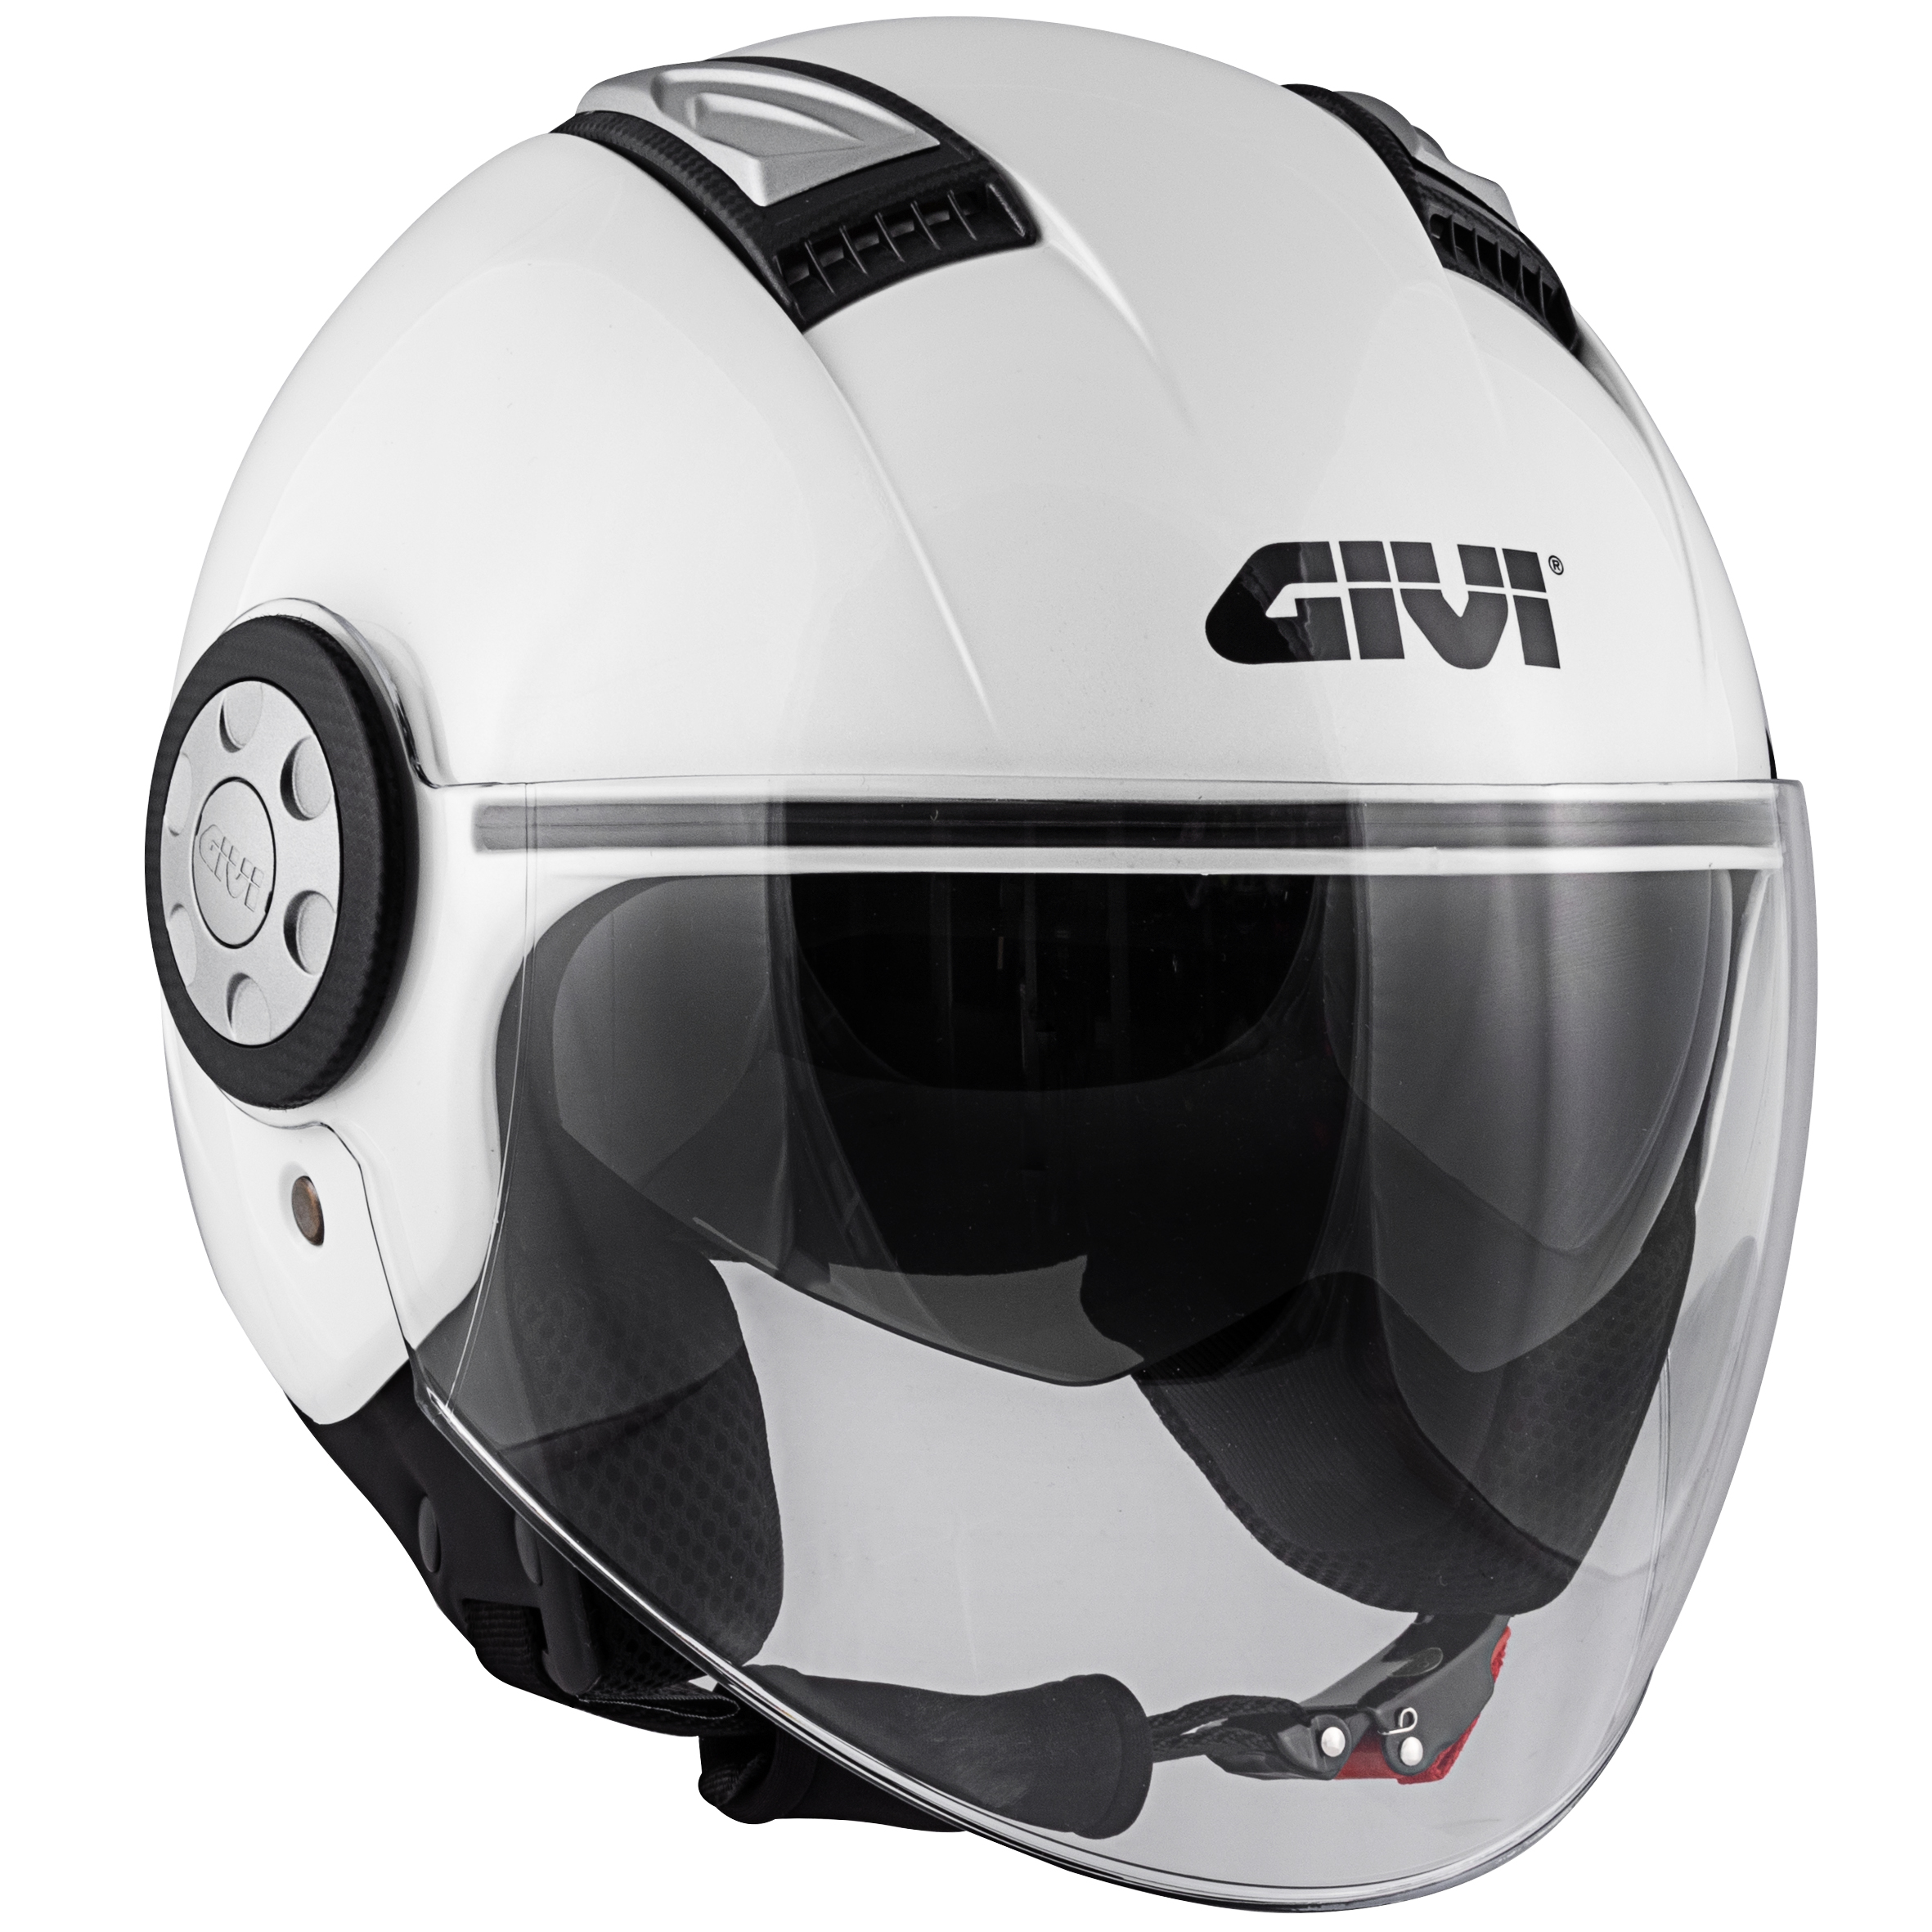 GIVI 11.1 Air Jet-R Color Solid